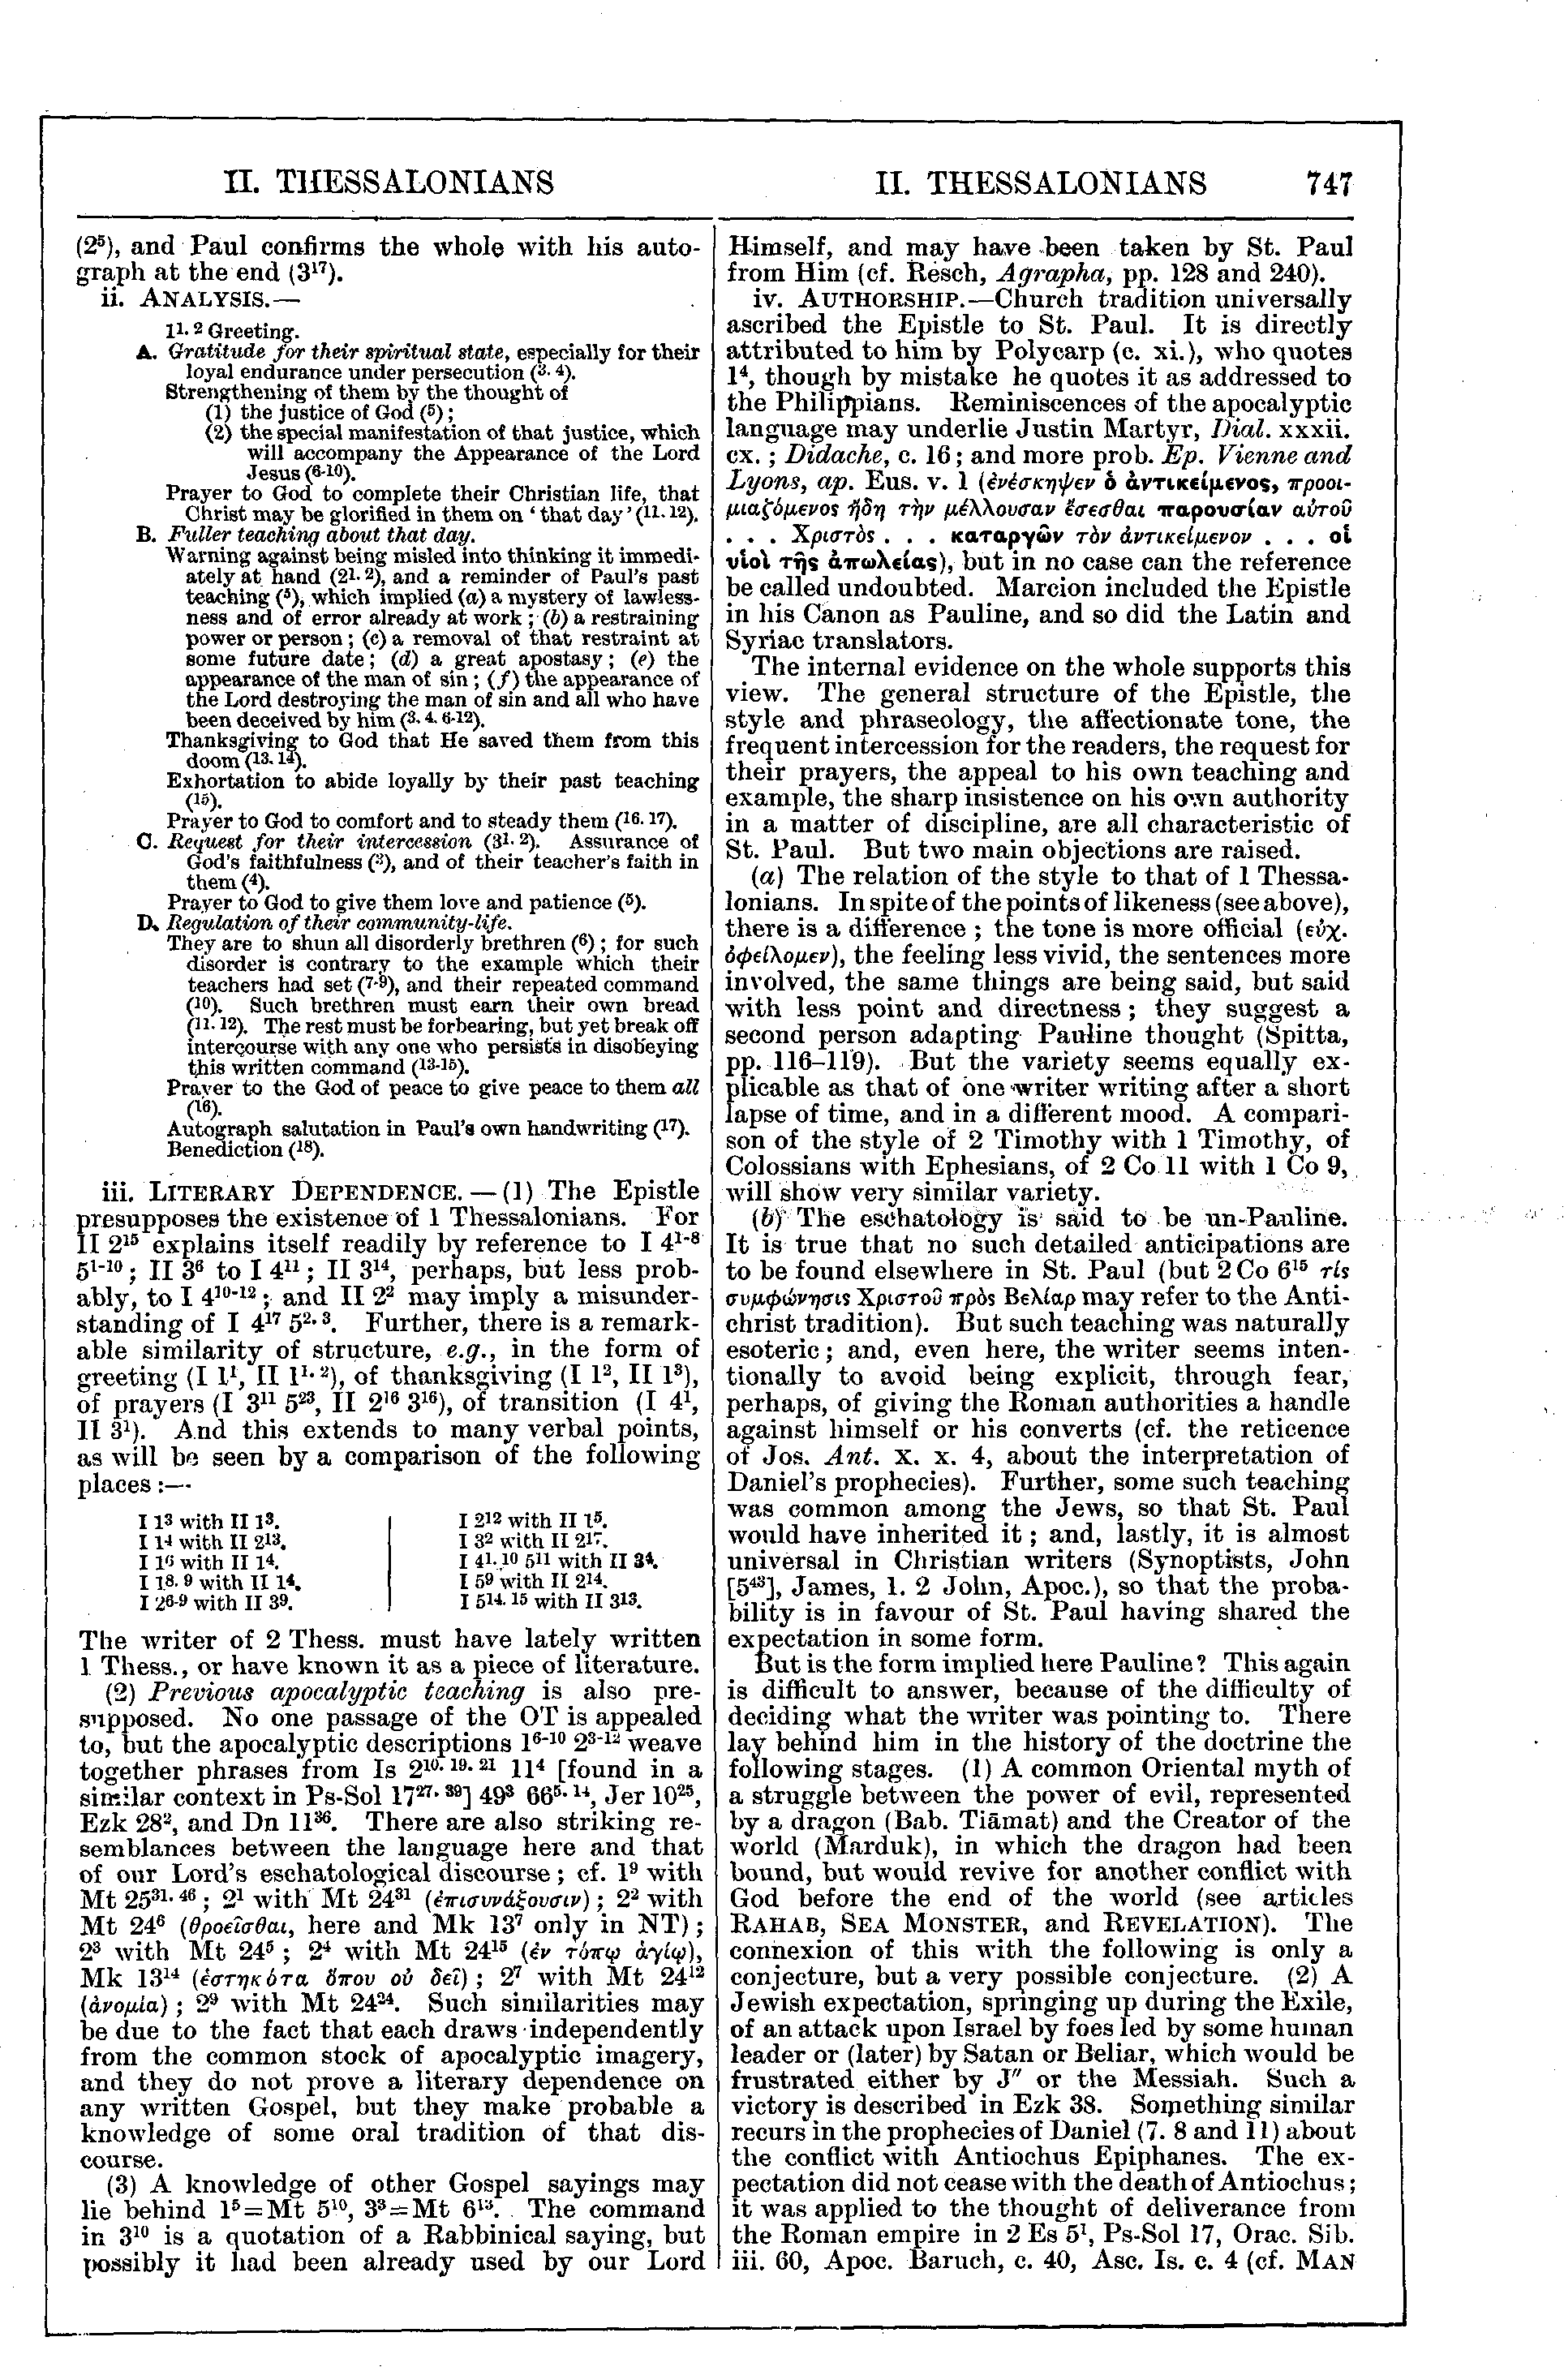 Image of page 747